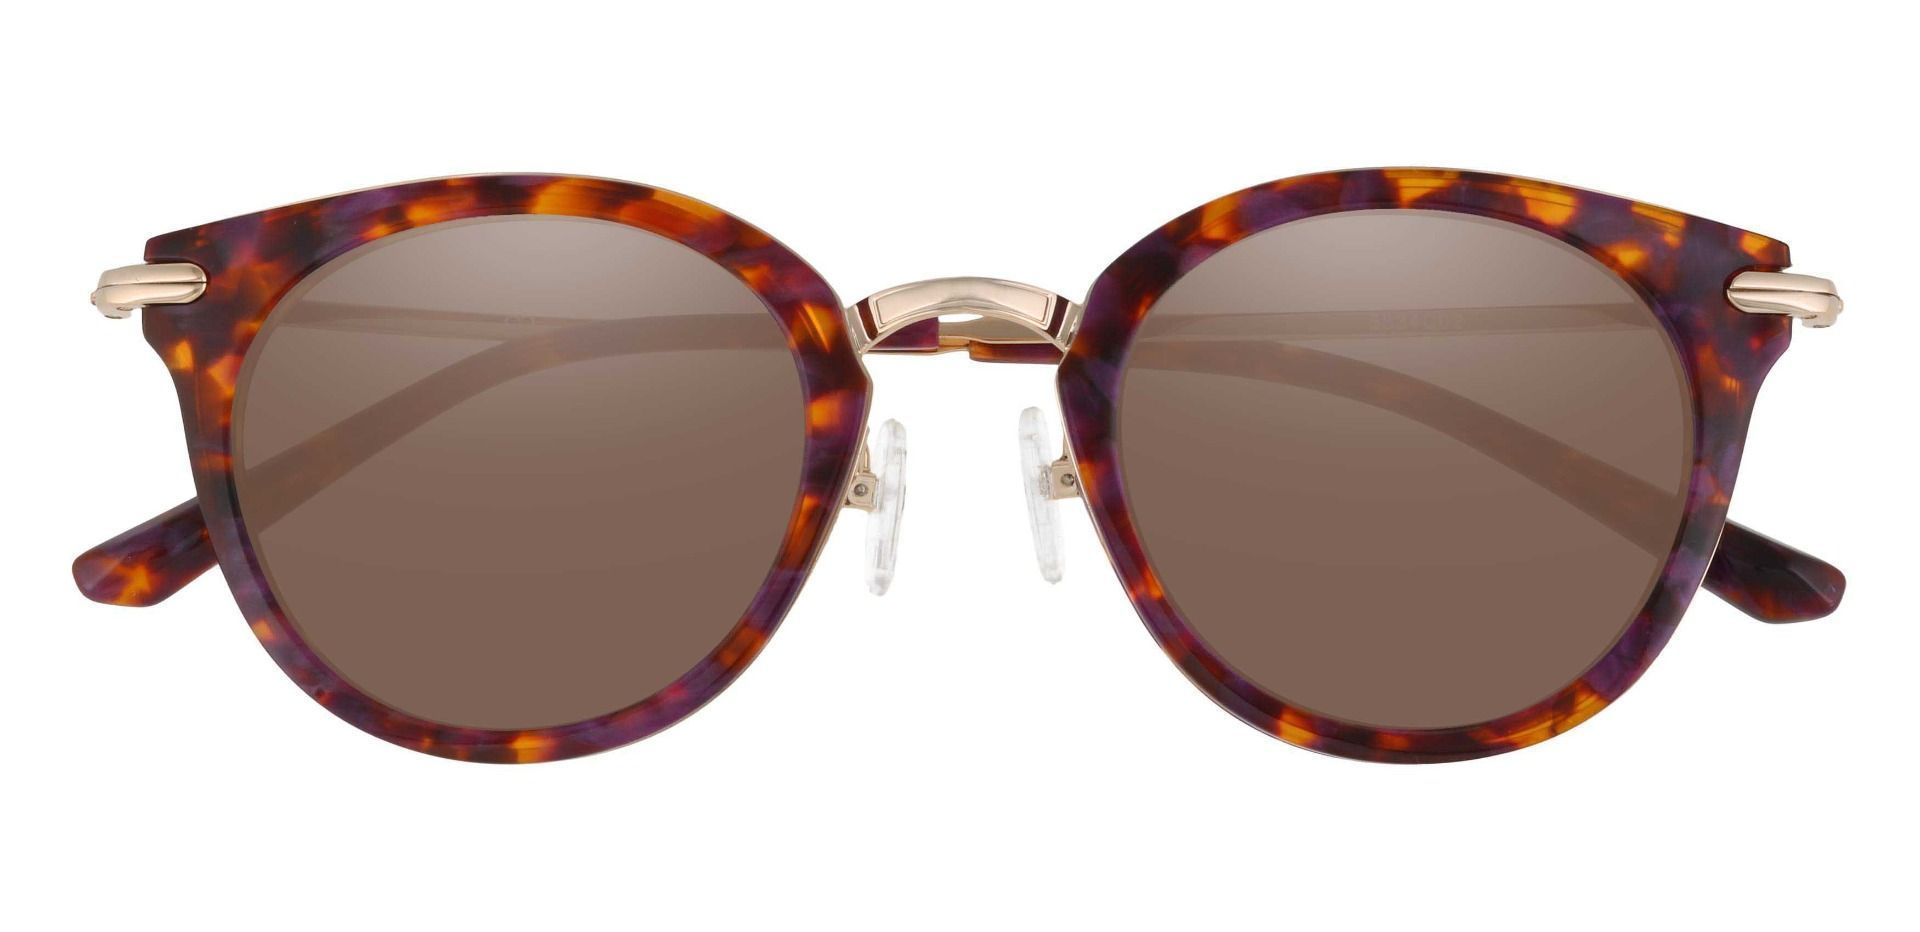 Seneca Round Reading Sunglasses - Floral Frame With Brown Lenses ...